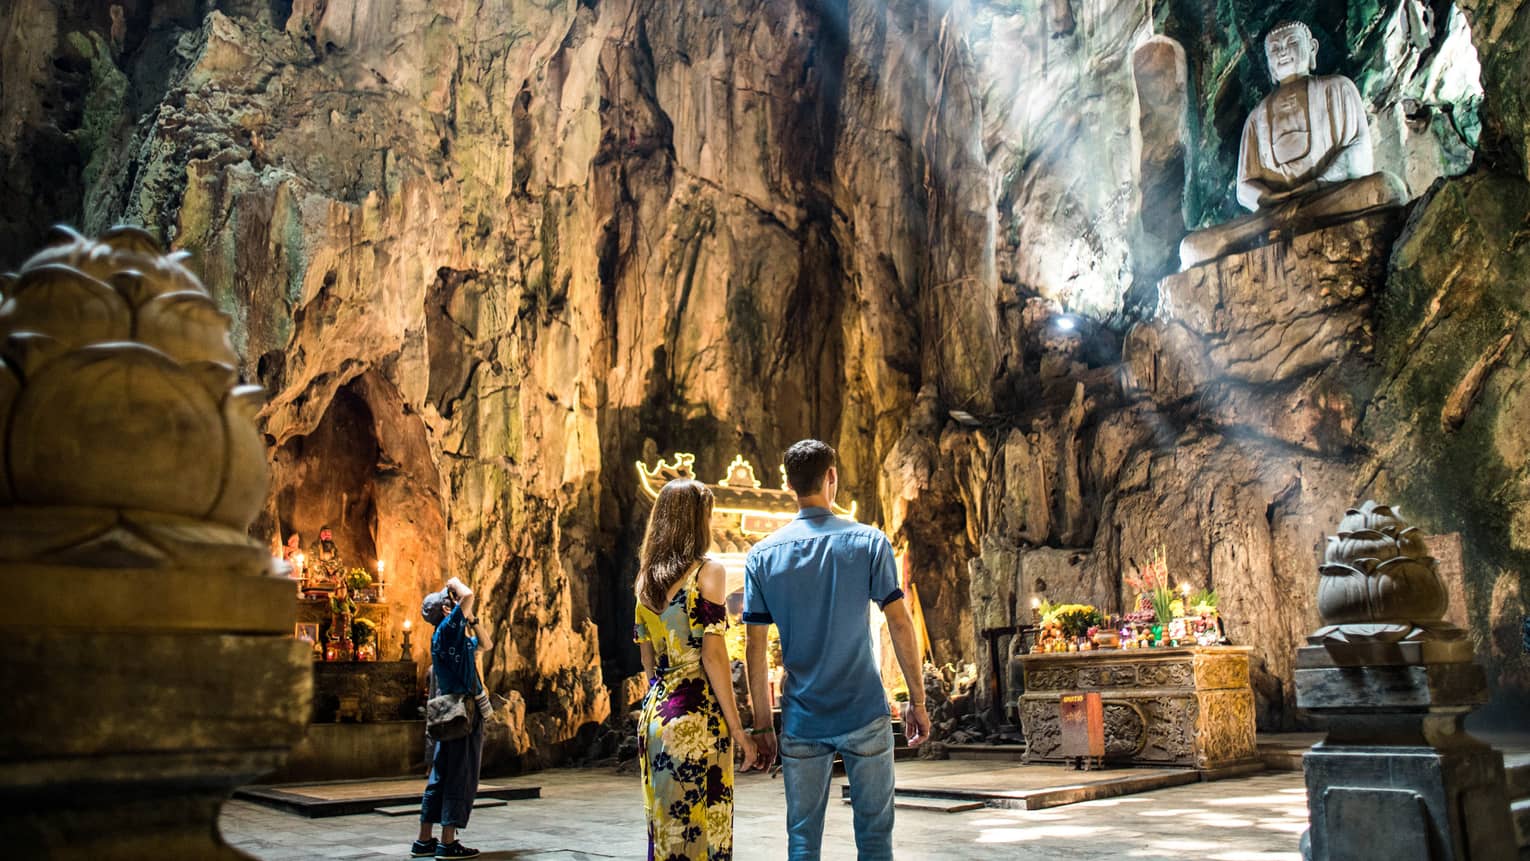 In a cave, three people look up at a large buddha statue atop a shelf in the wall; light streaming in and a shrine below.